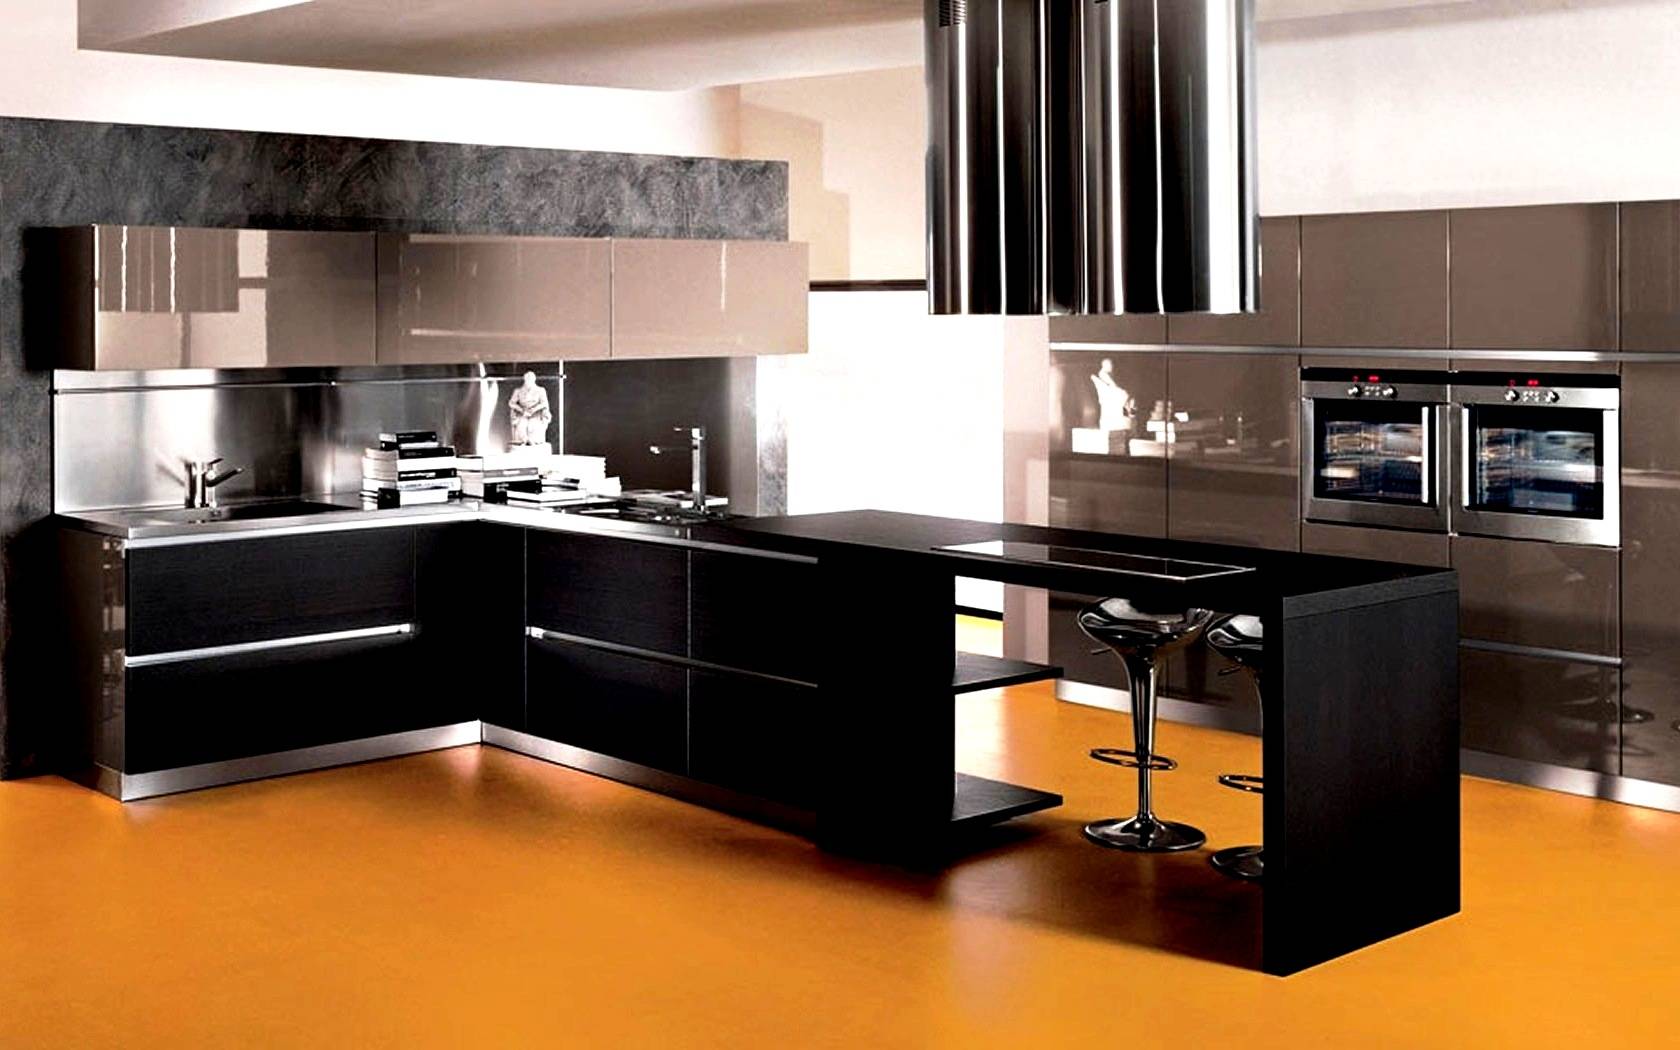 30 Awesome Modular Kitchen Designs The WoW Style